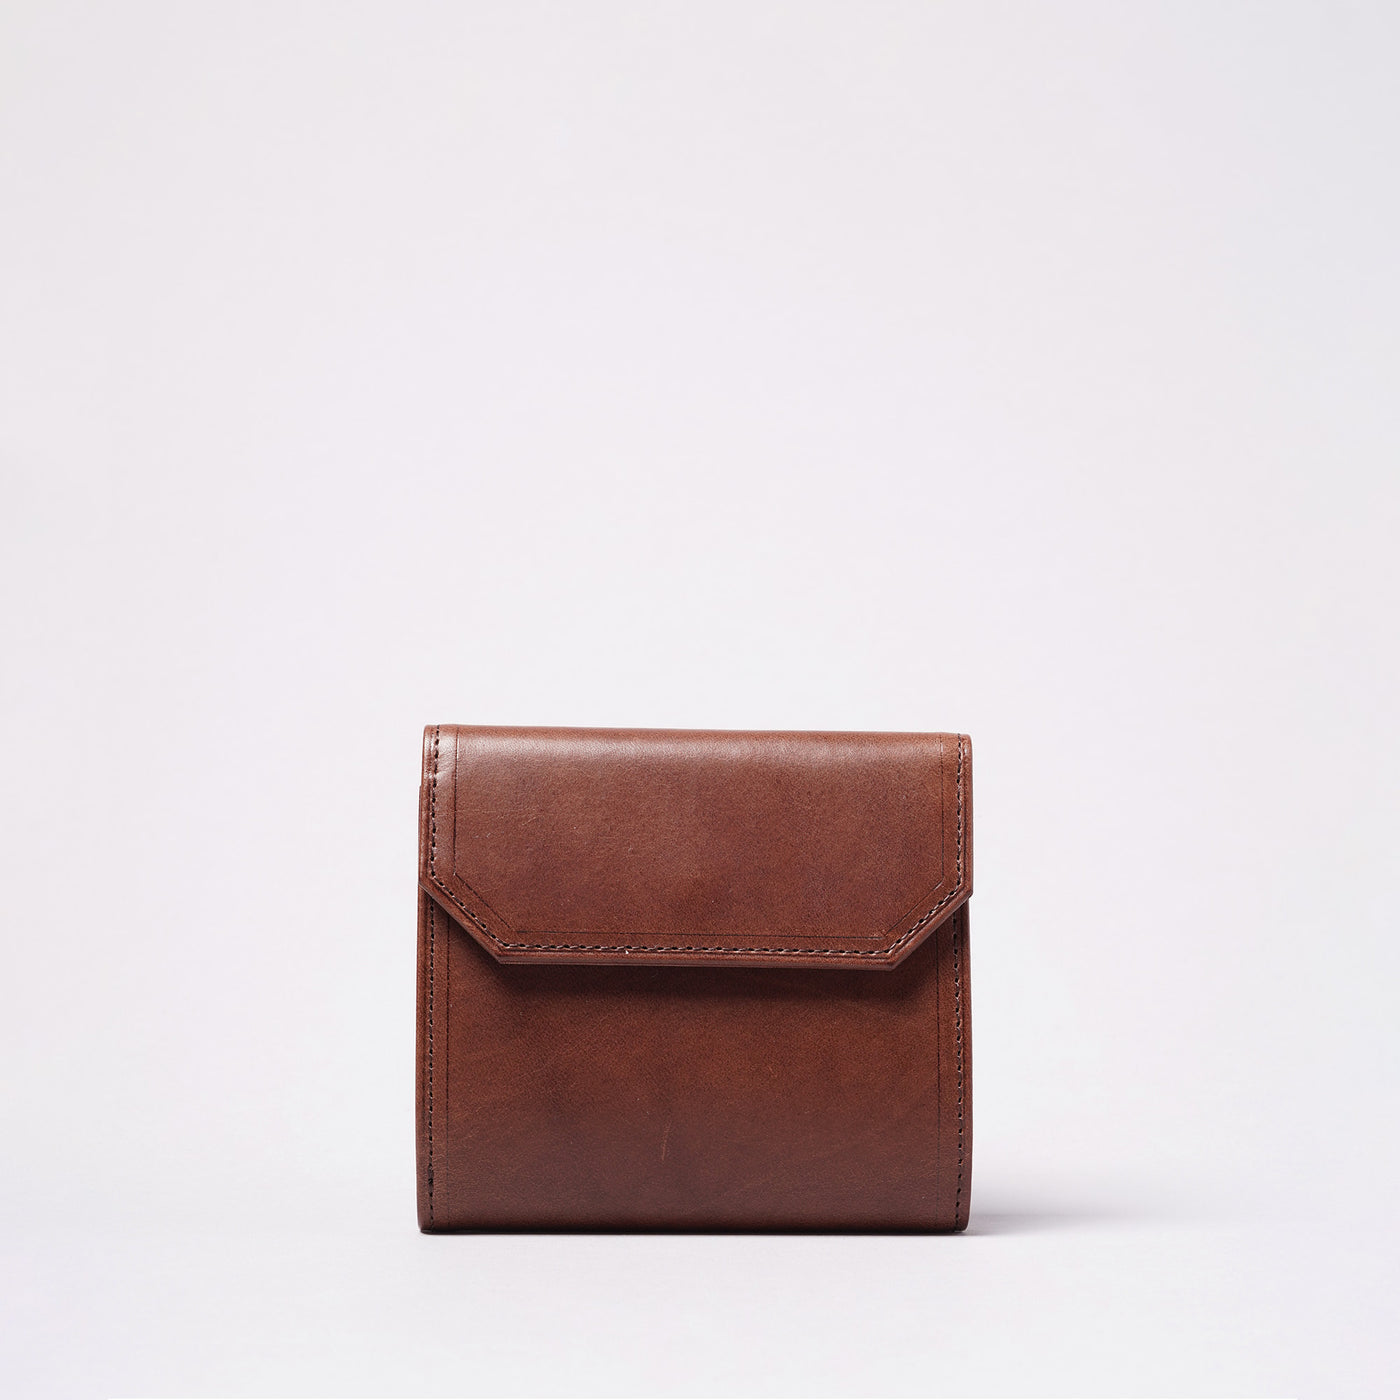 <4U by UNOFUKU> Bifold Wallet with Flap / Navy